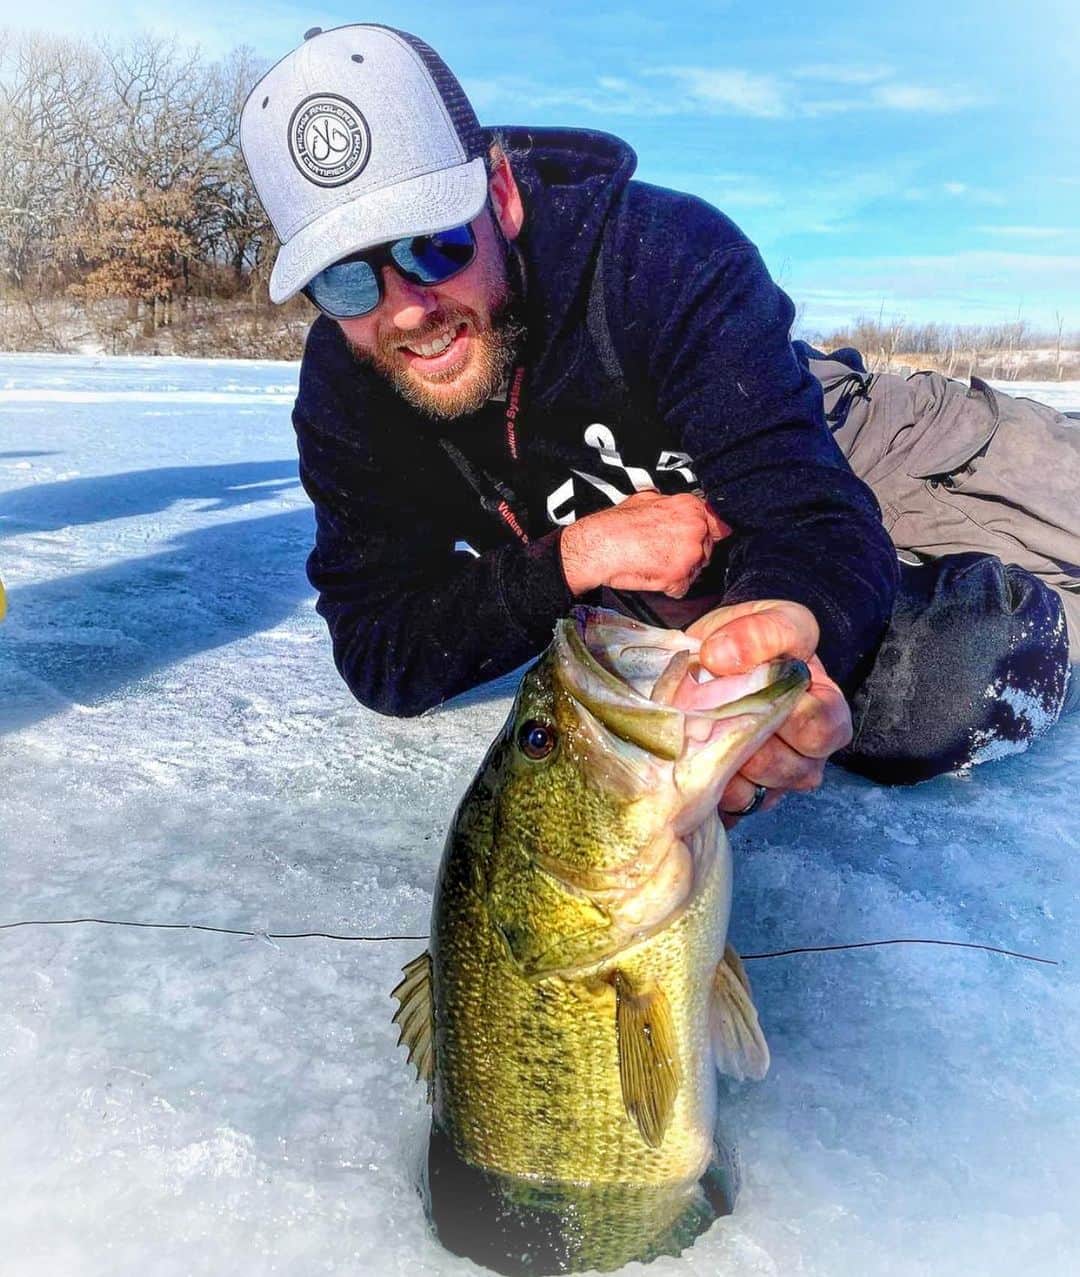 Filthy Anglers™のインスタグラム：「We posted @tyler_the_fish_whisperer last week, however this photo was buried behind the first and we figured it deserved some front page love, that’s all! Congrats again @tyler_the_fish_whisperer you are Certified Filthy www.filthyanglers.com #fishing #filthyanglers #bassfishing #icefishing #hunting #angler #monsterbass #bassfish #fish #nature #largemouthbass #kayak #cold #winter #getfilthy」